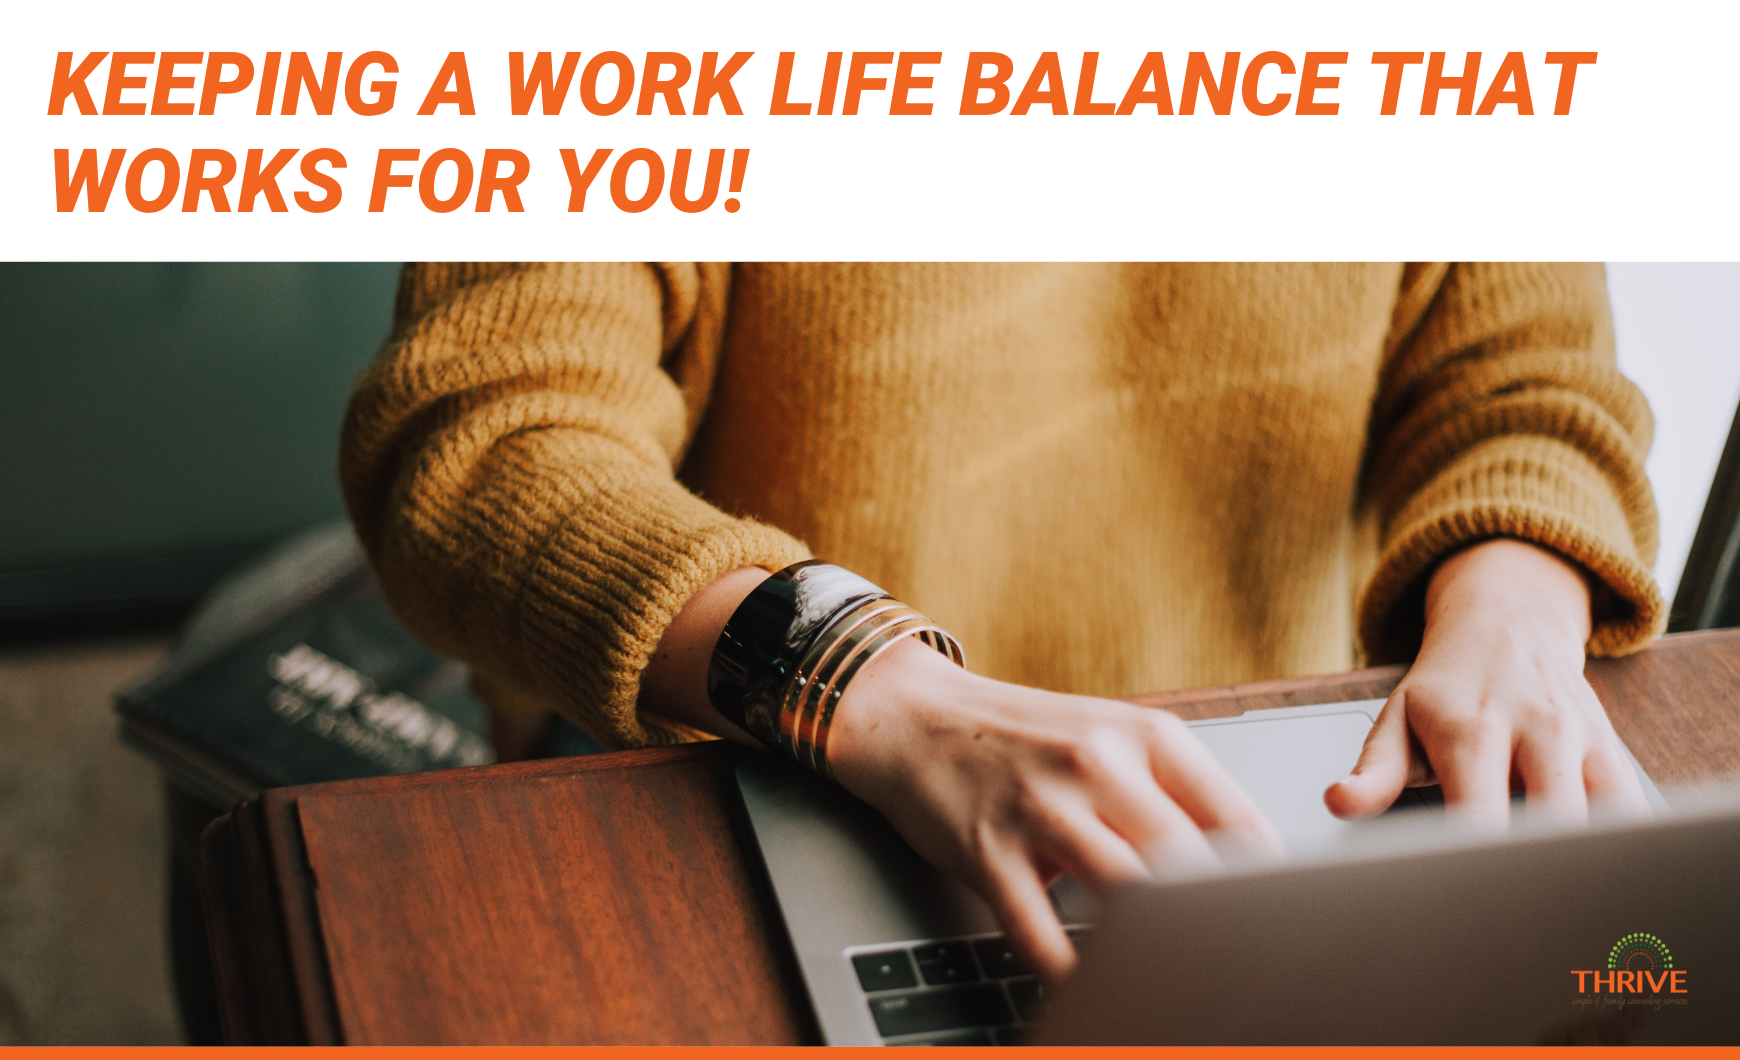 Dark orange text that reads "Keeping a work life balance that works for you!" above a stock photo of a person in a yellow sweater, from the shoulders down, working on a laptop on a wooden table.